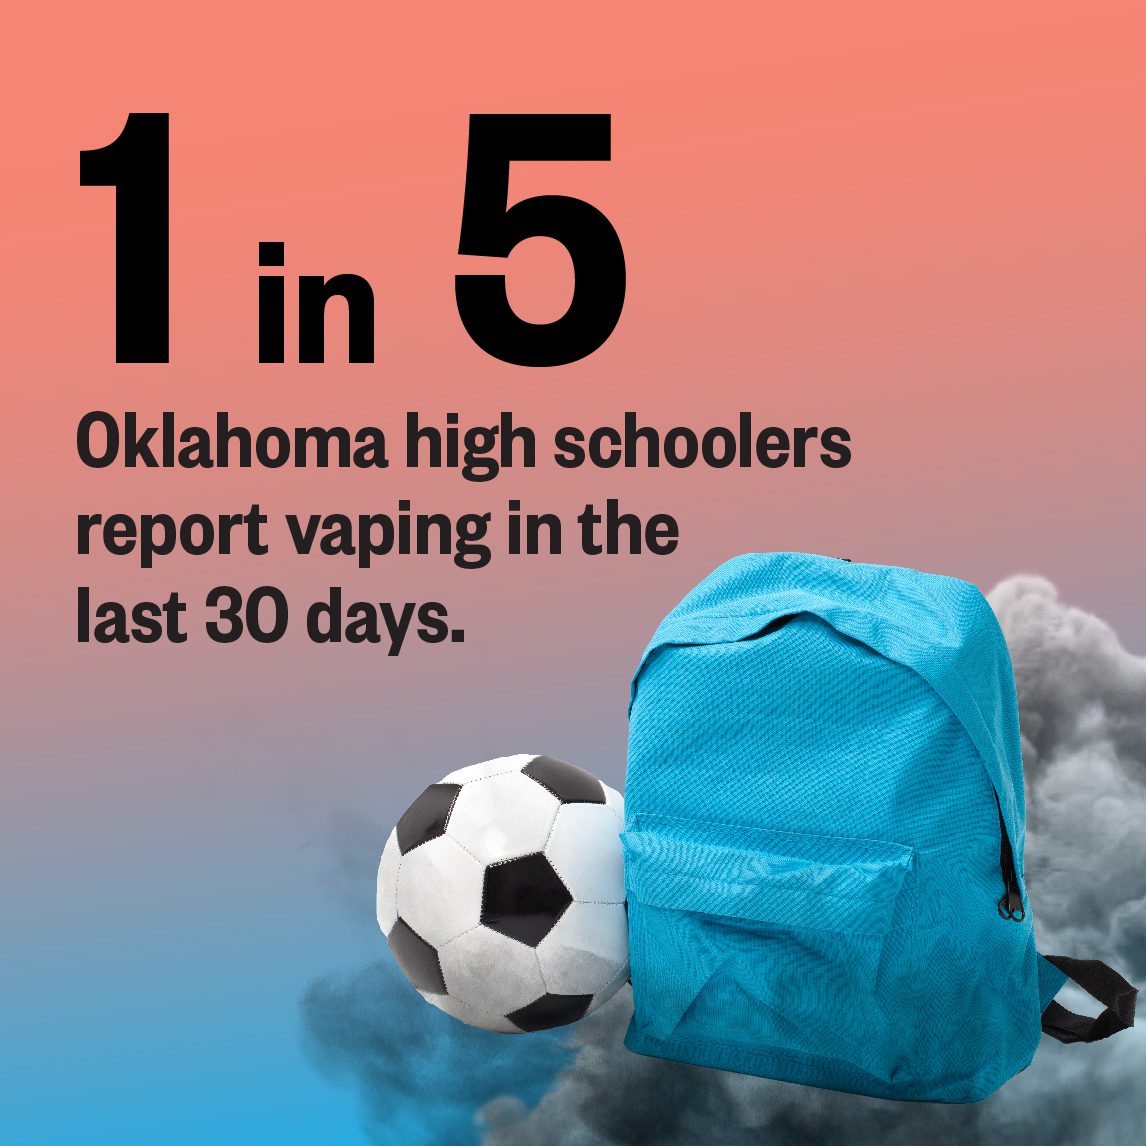 1 in 5 Oklahoma high schoolers report vaping in the last 30 days.